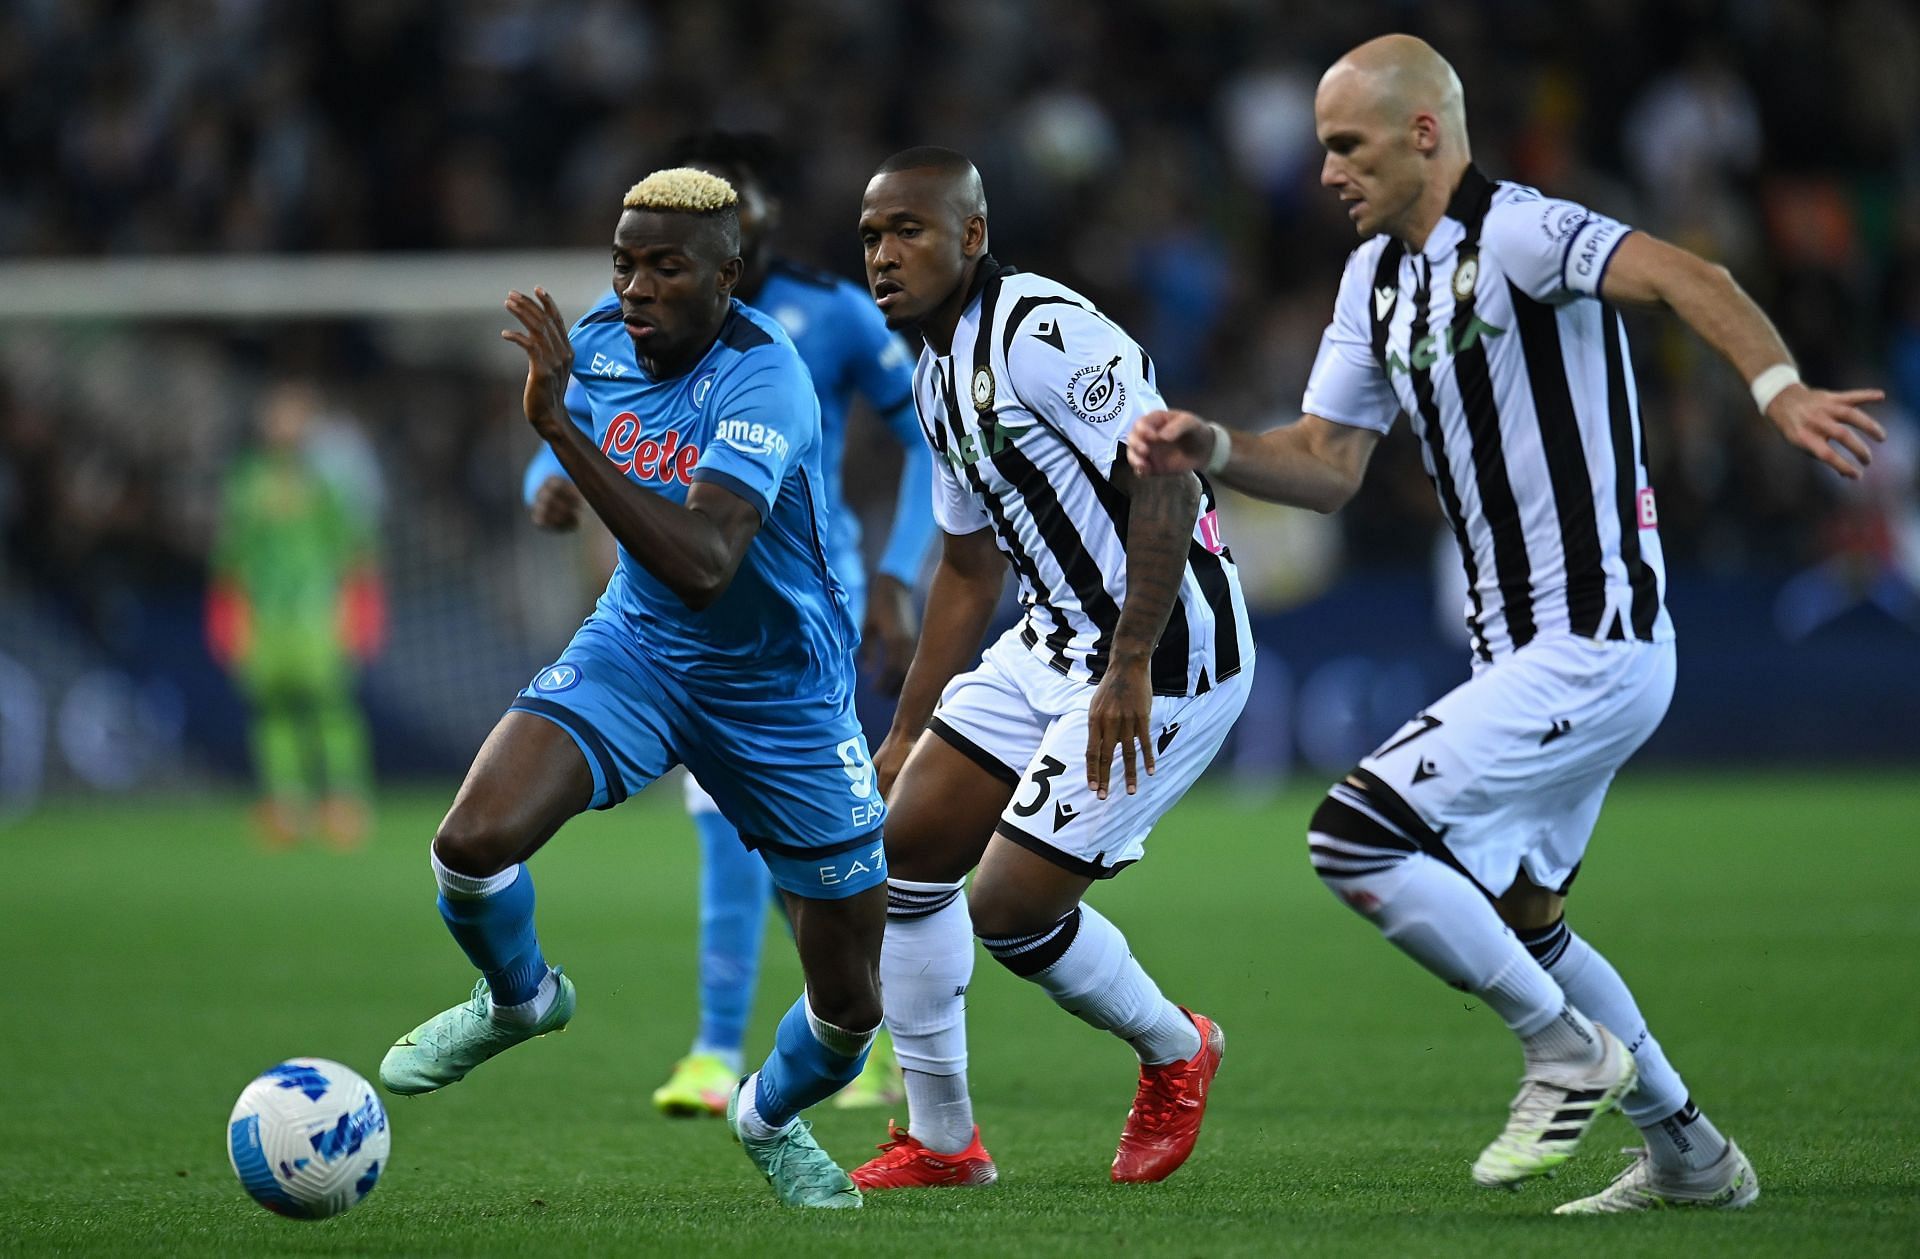 Napoli face Udinese in their upcoming Serie A fixture on Saturday